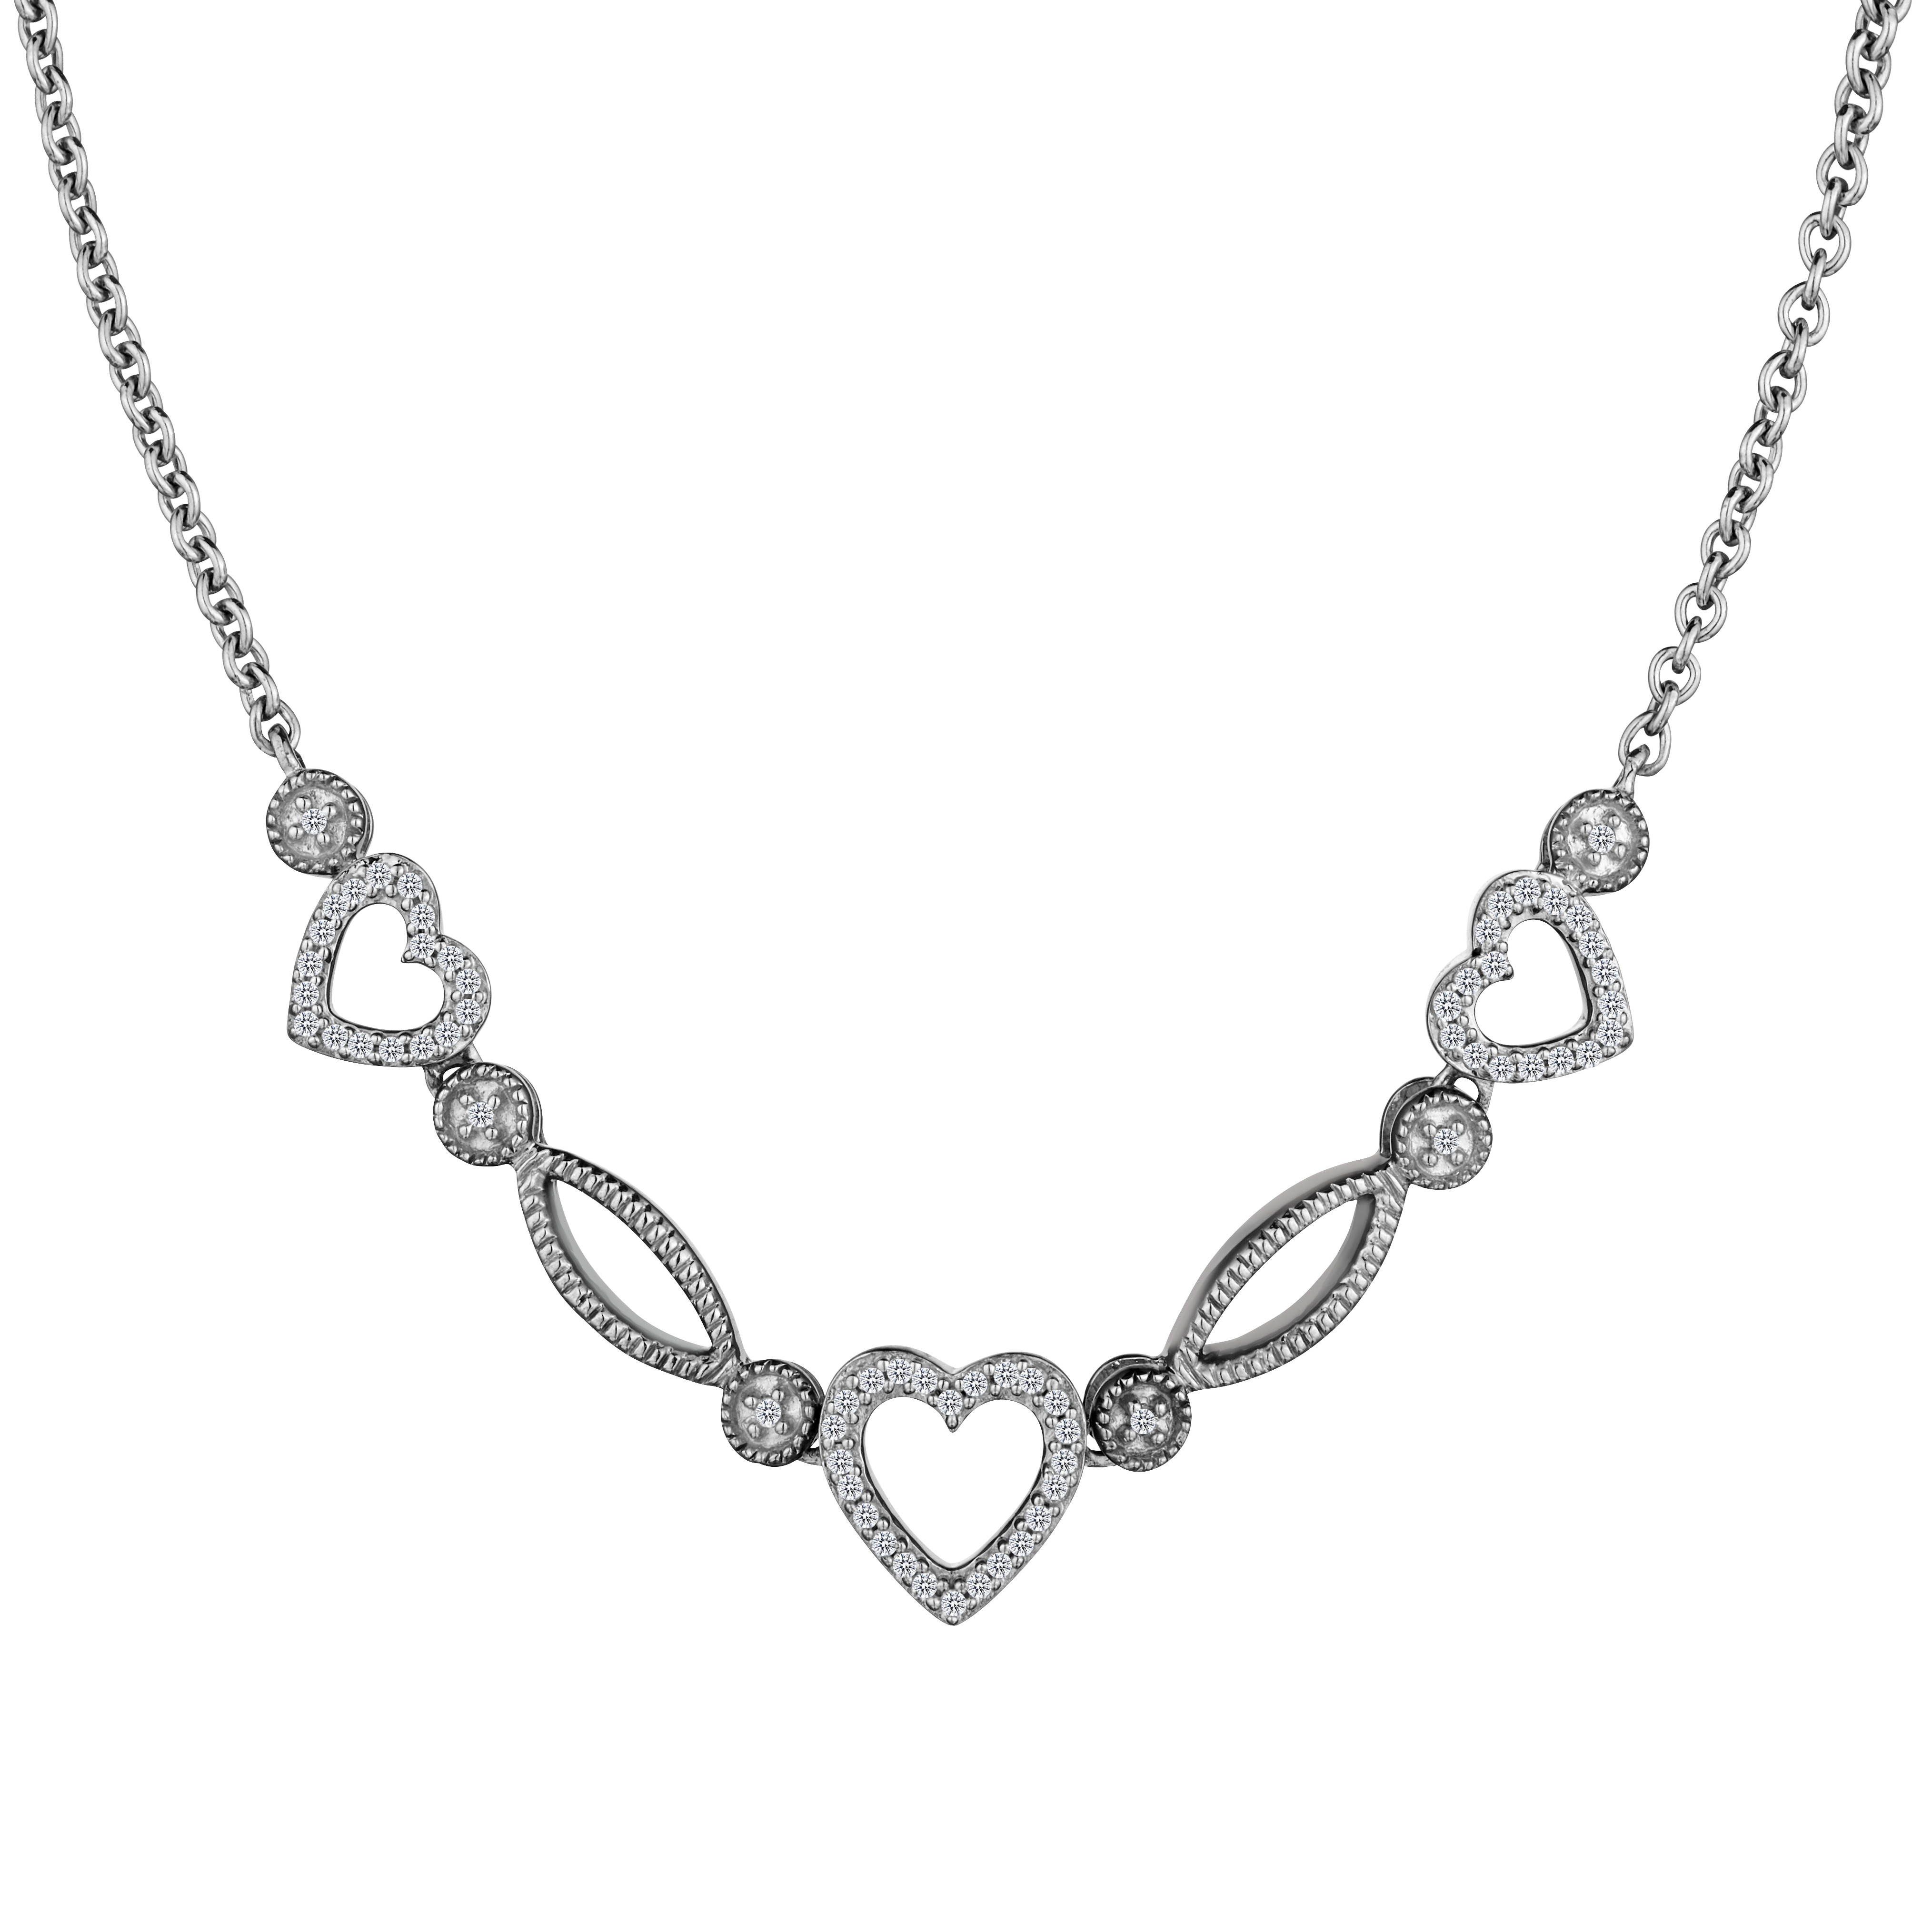 .18 Carat Diamond "Past, Present, Future" Heart Necklace, Sterling Silver. Necklaces and Pendants. Griffin Jewellery Designs.